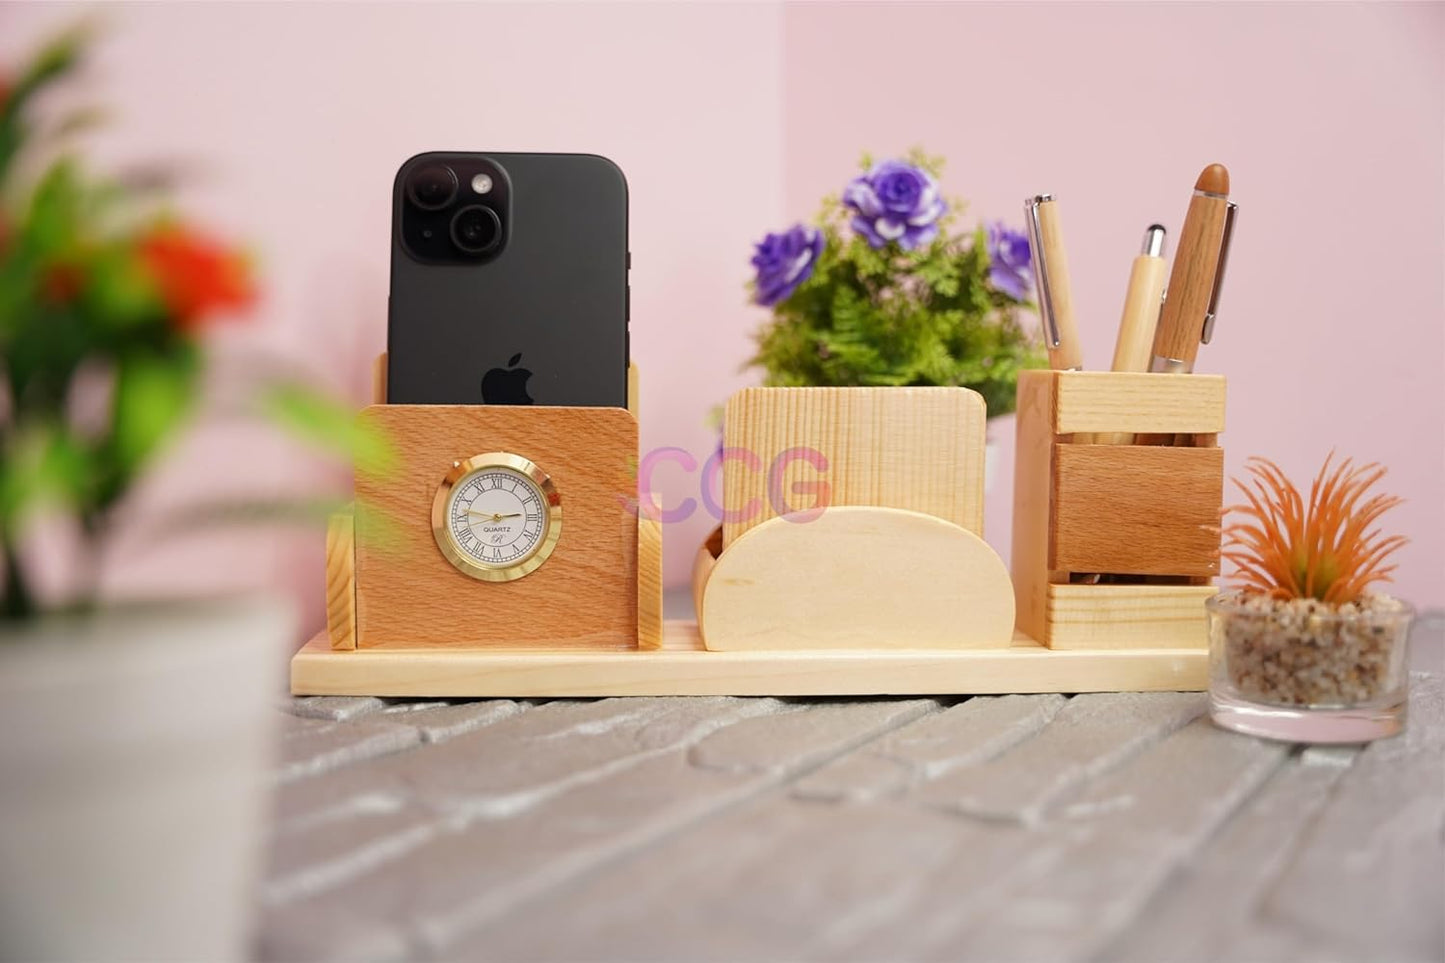 Craft Closet & Gifts - Wooden Pencil/Pen Stand Holder with Clock, Mobile Holder, and Card Holder - Design 2 - Customized Table Desk Office Accessory for IAS, Advocate, Office & Corporate Gifts